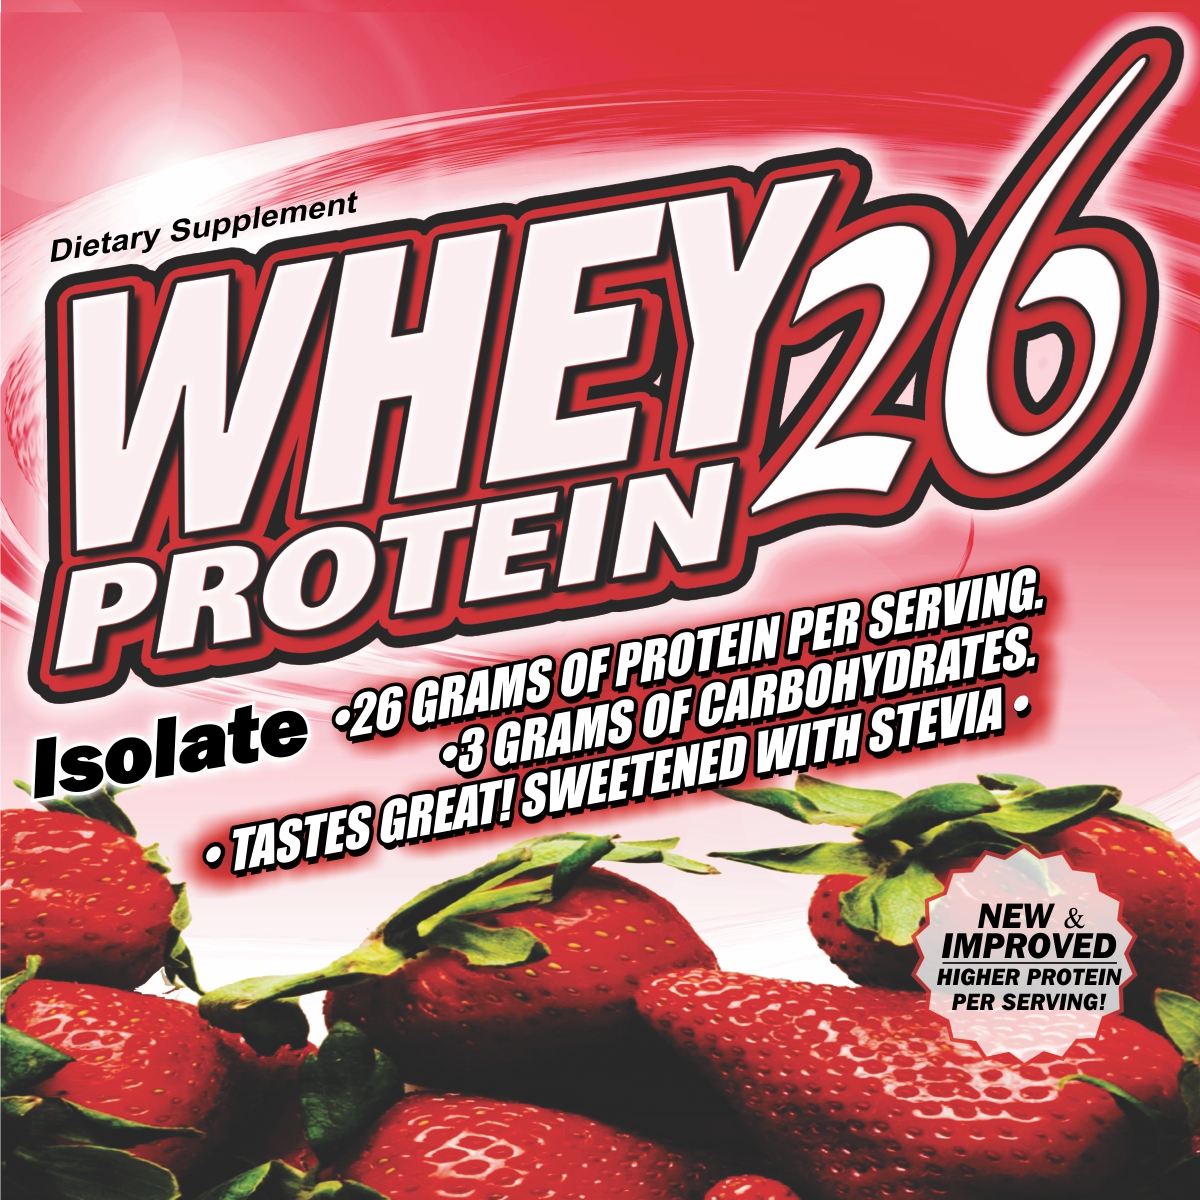 Whey-26 Strawberry [DISCONTINUED]